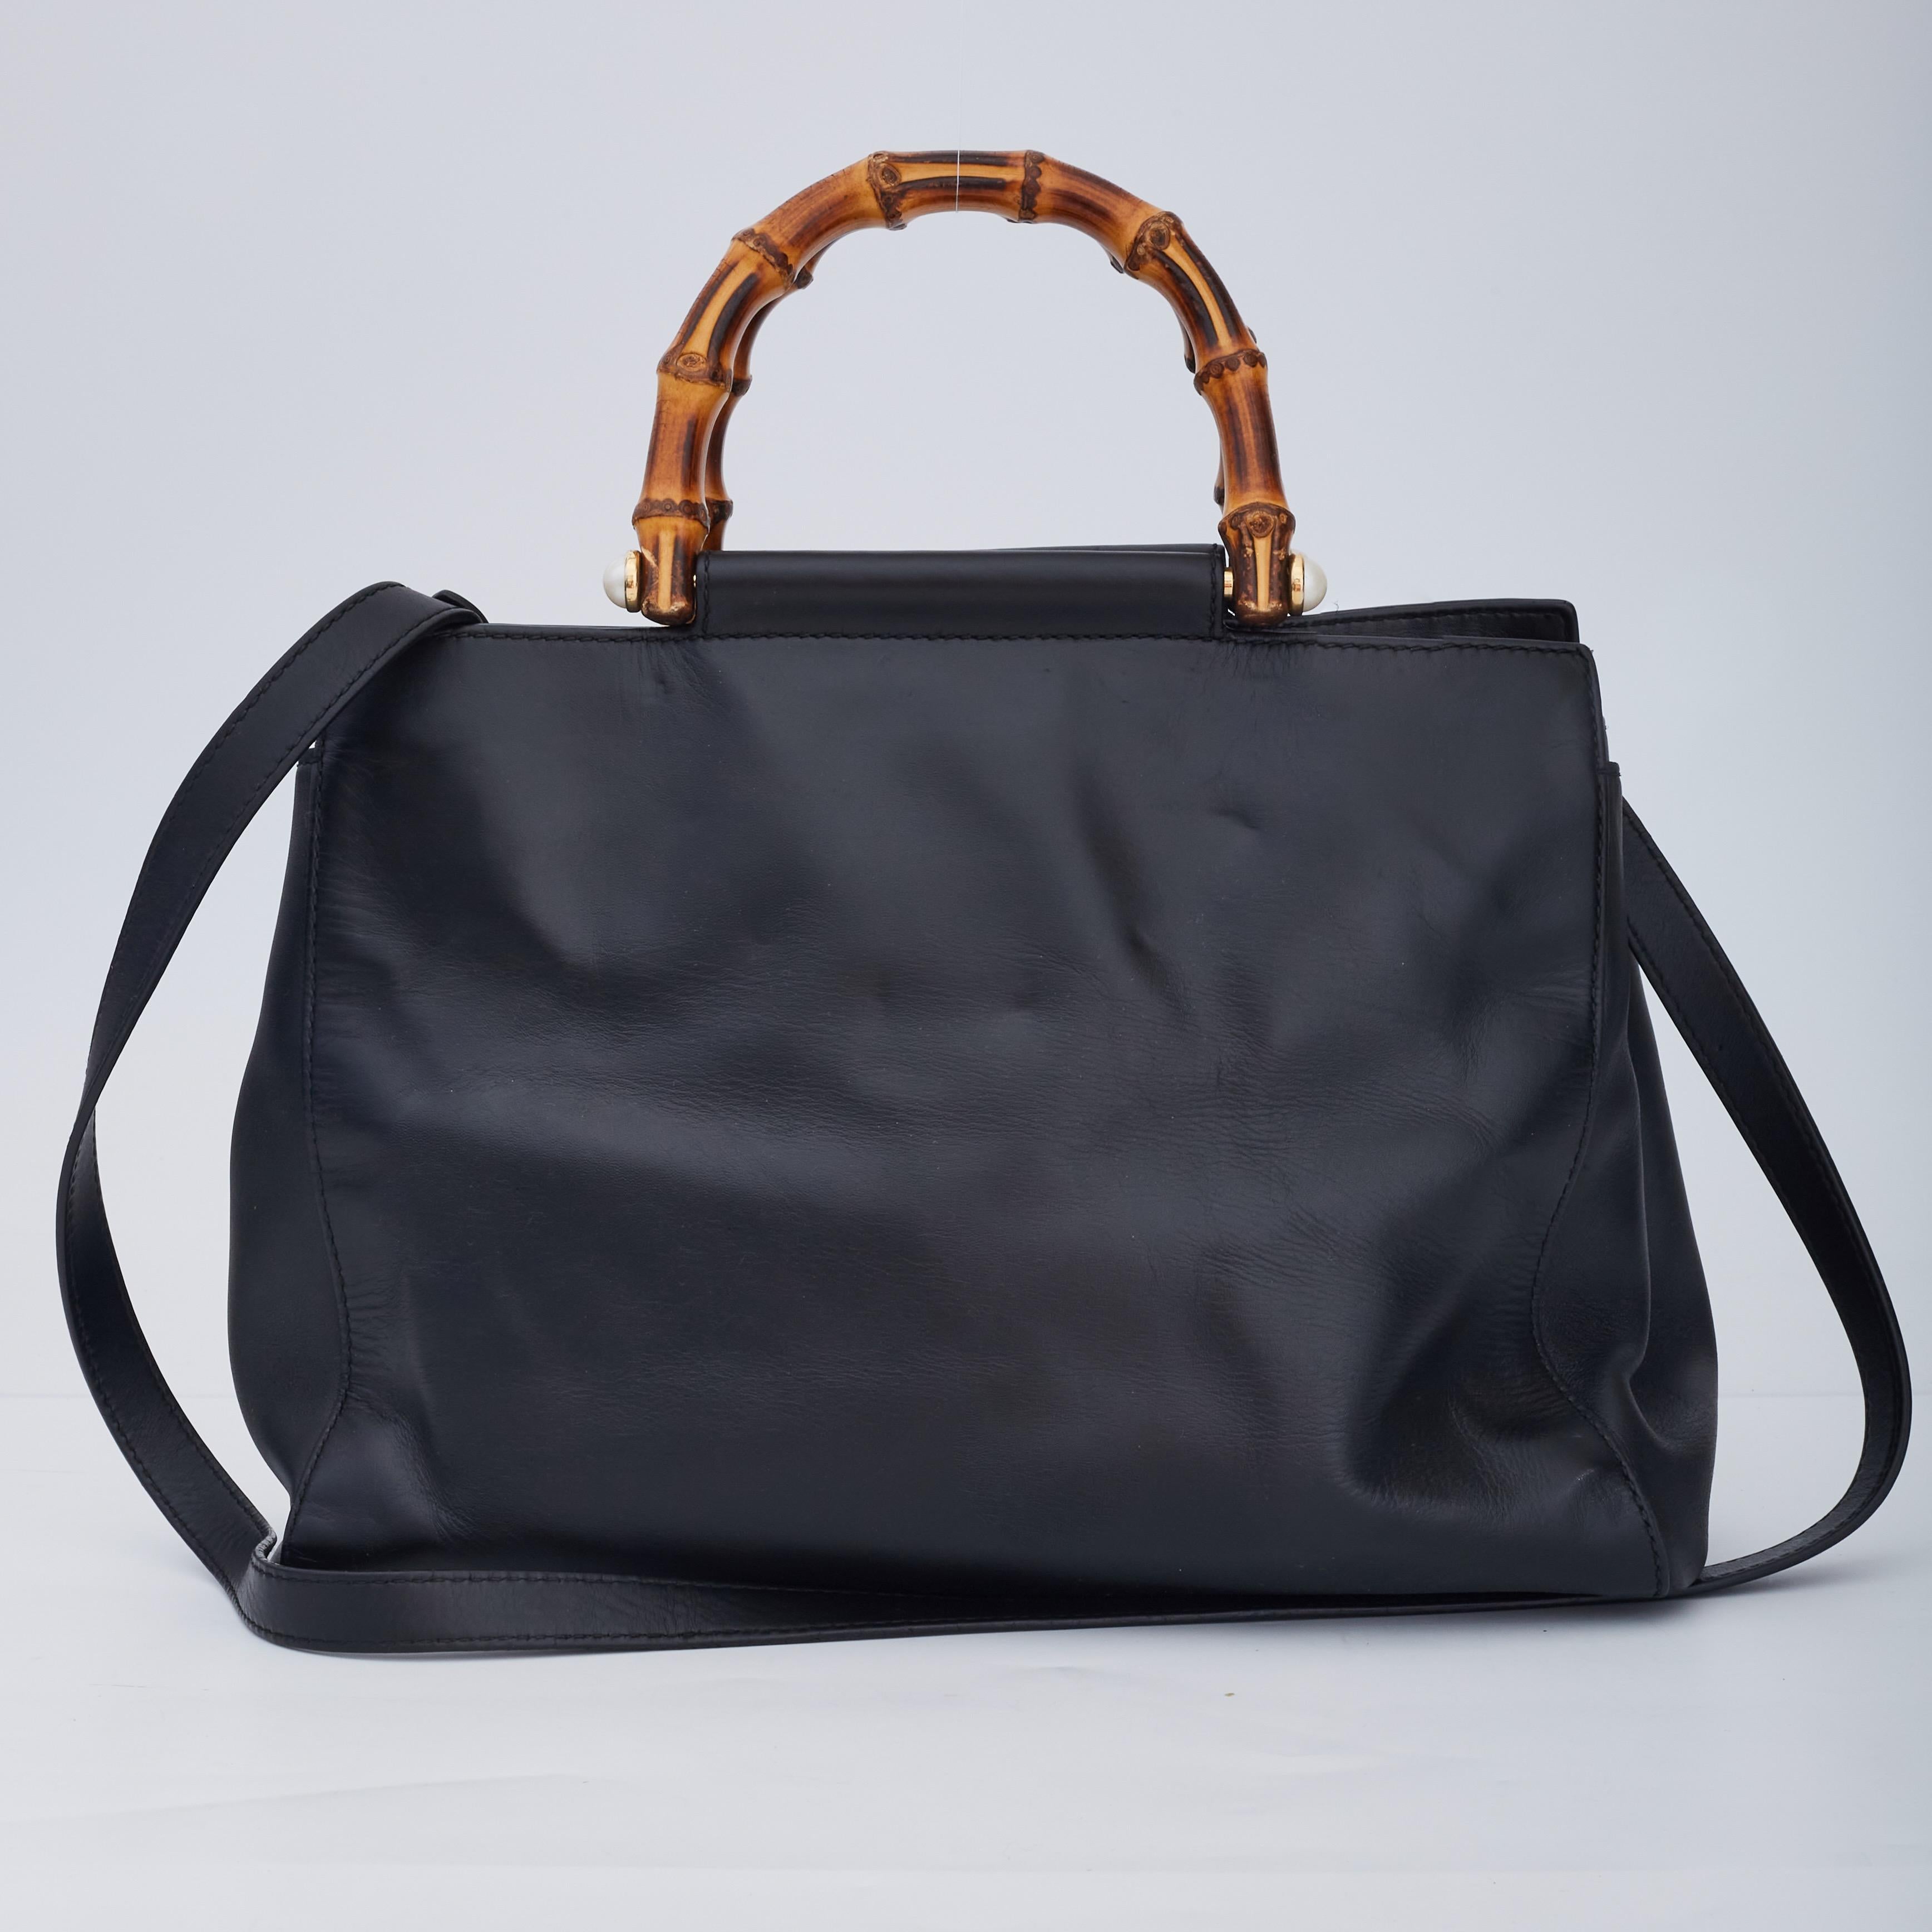 This bag is made of buttery soft nappa leather in black. The bag features looping bamboo handles with pearl details at the end of them, an optional leather shoulder strap and gold hardware. The top opens to a beige microfiber interior with zipper